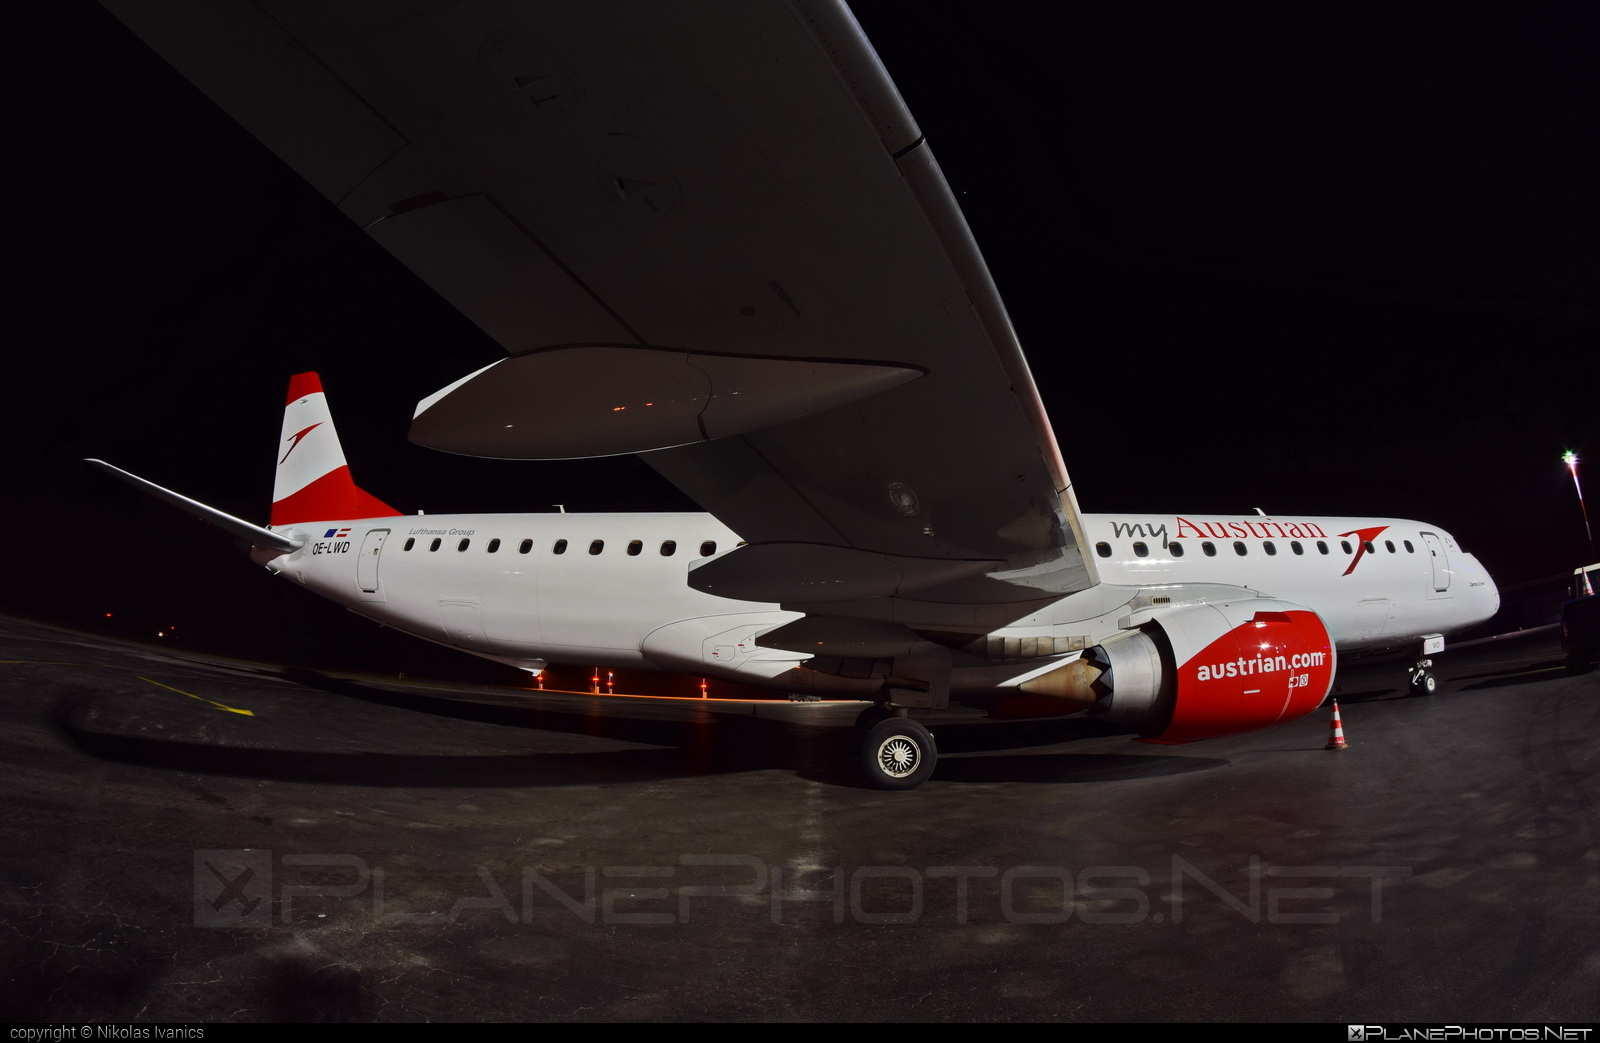 Embraer E195LR (ERJ-190-200LR) - OE-LWD operated by Austrian Airlines #austrian #austrianAirlines #e190 #e190200 #e190200lr #e195lr #embraer #embraer190200lr #embraer195 #embraer195lr